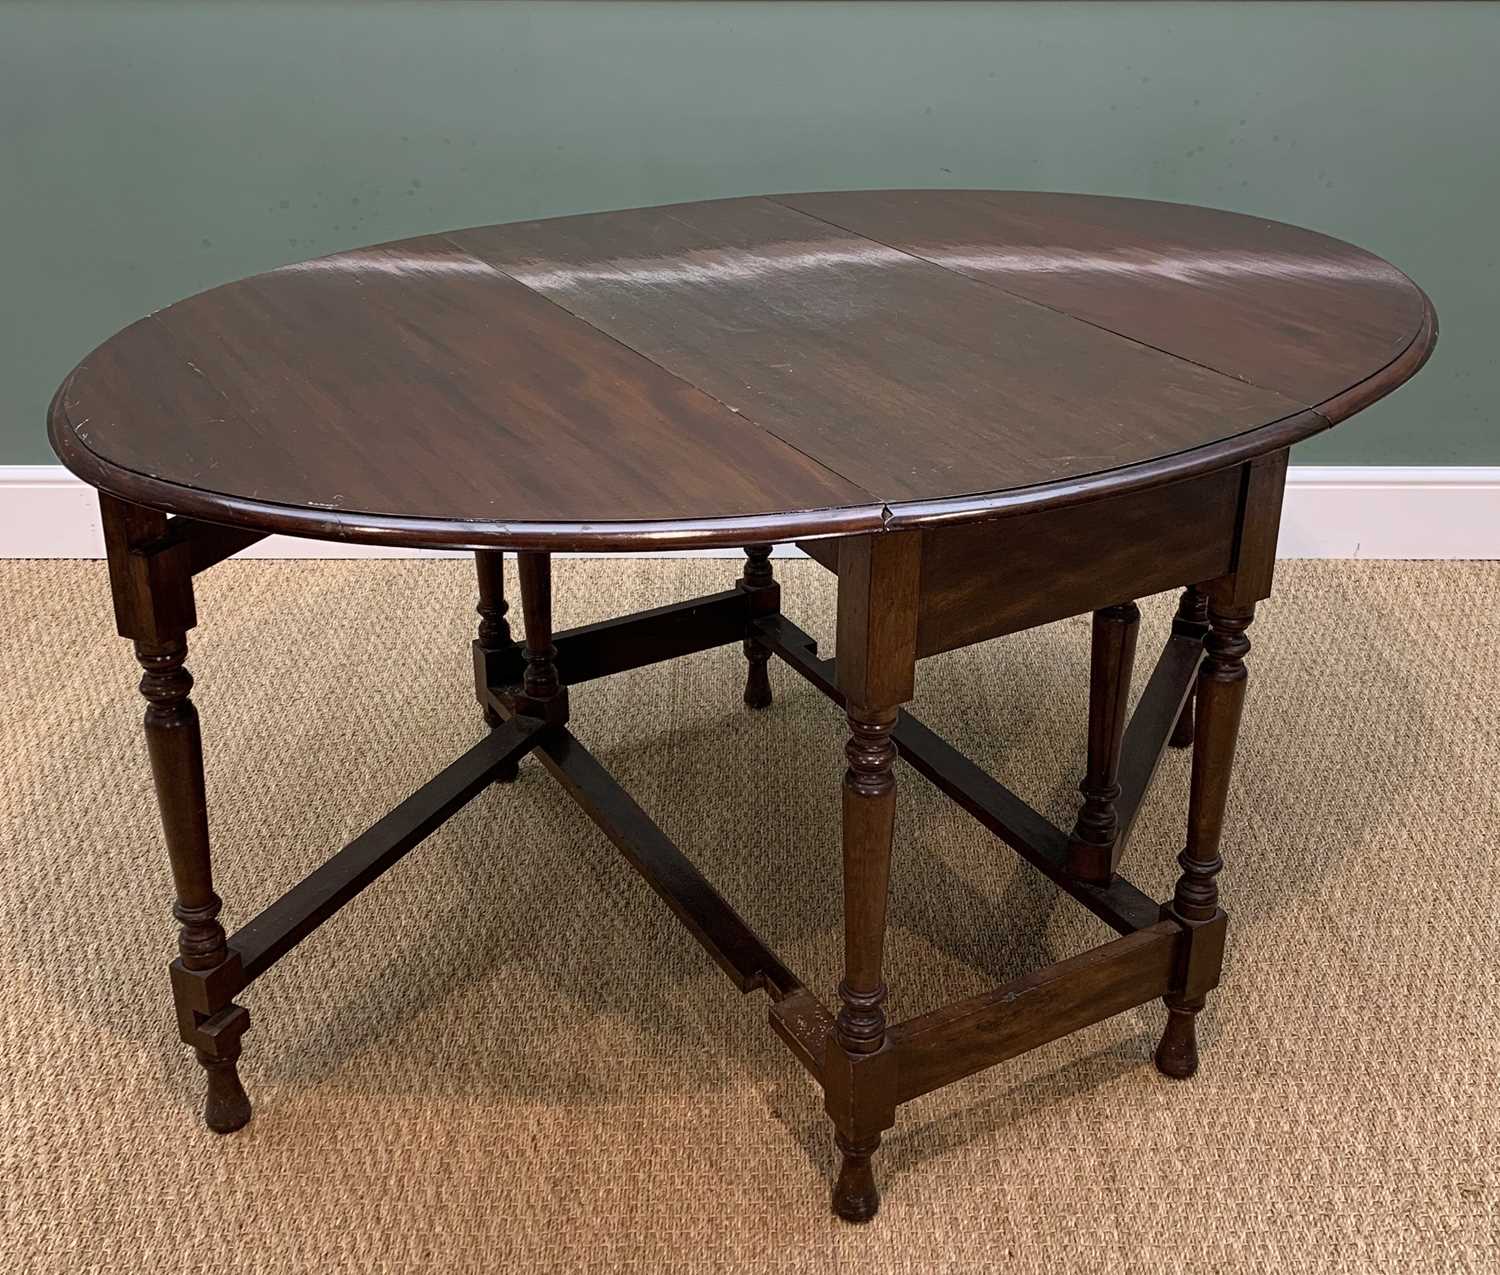 LATE 19TH C. MAHOGANY CHEST, GATELEG TABLE & CHAIRS, the chest north country or Scottish, fitted - Image 10 of 11